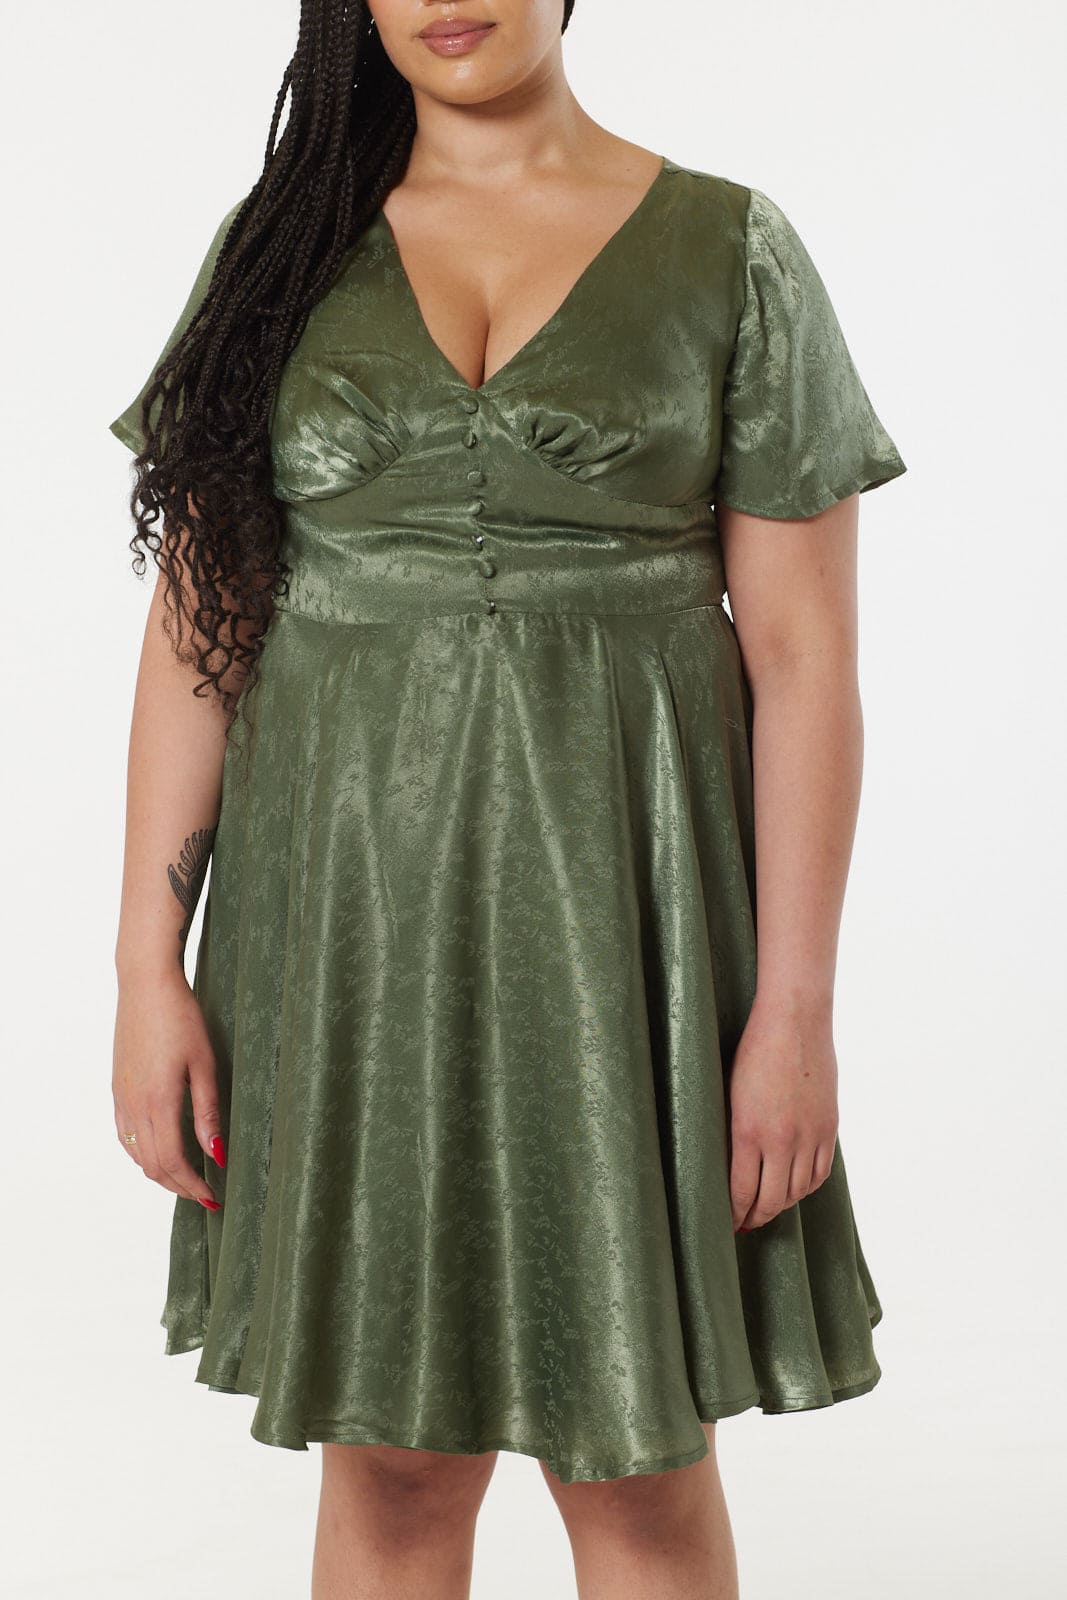 Kaylee Fit and Flare, Midi Swing Green Dress in Jacquard